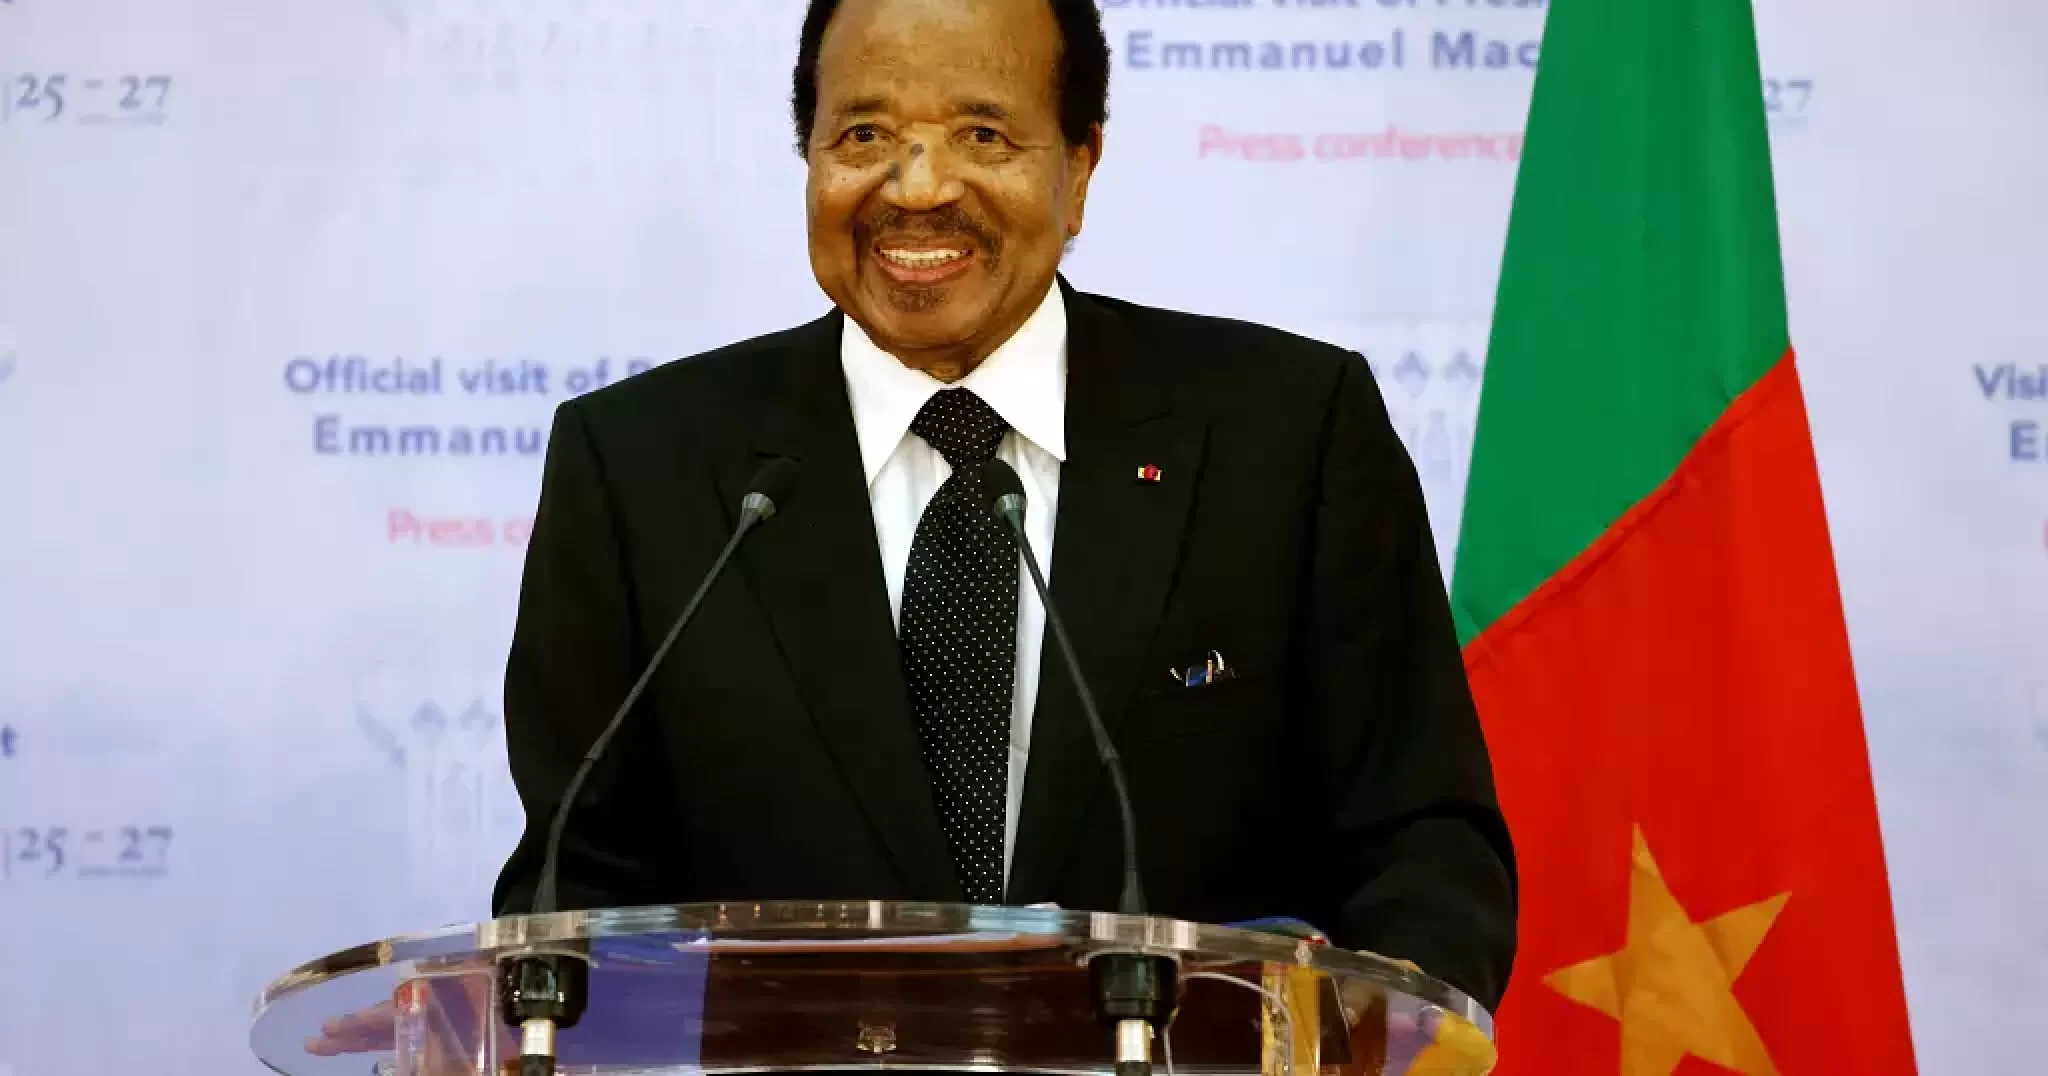 Young Cameroonians lead calls for an end to Biya’s 40-year presidency